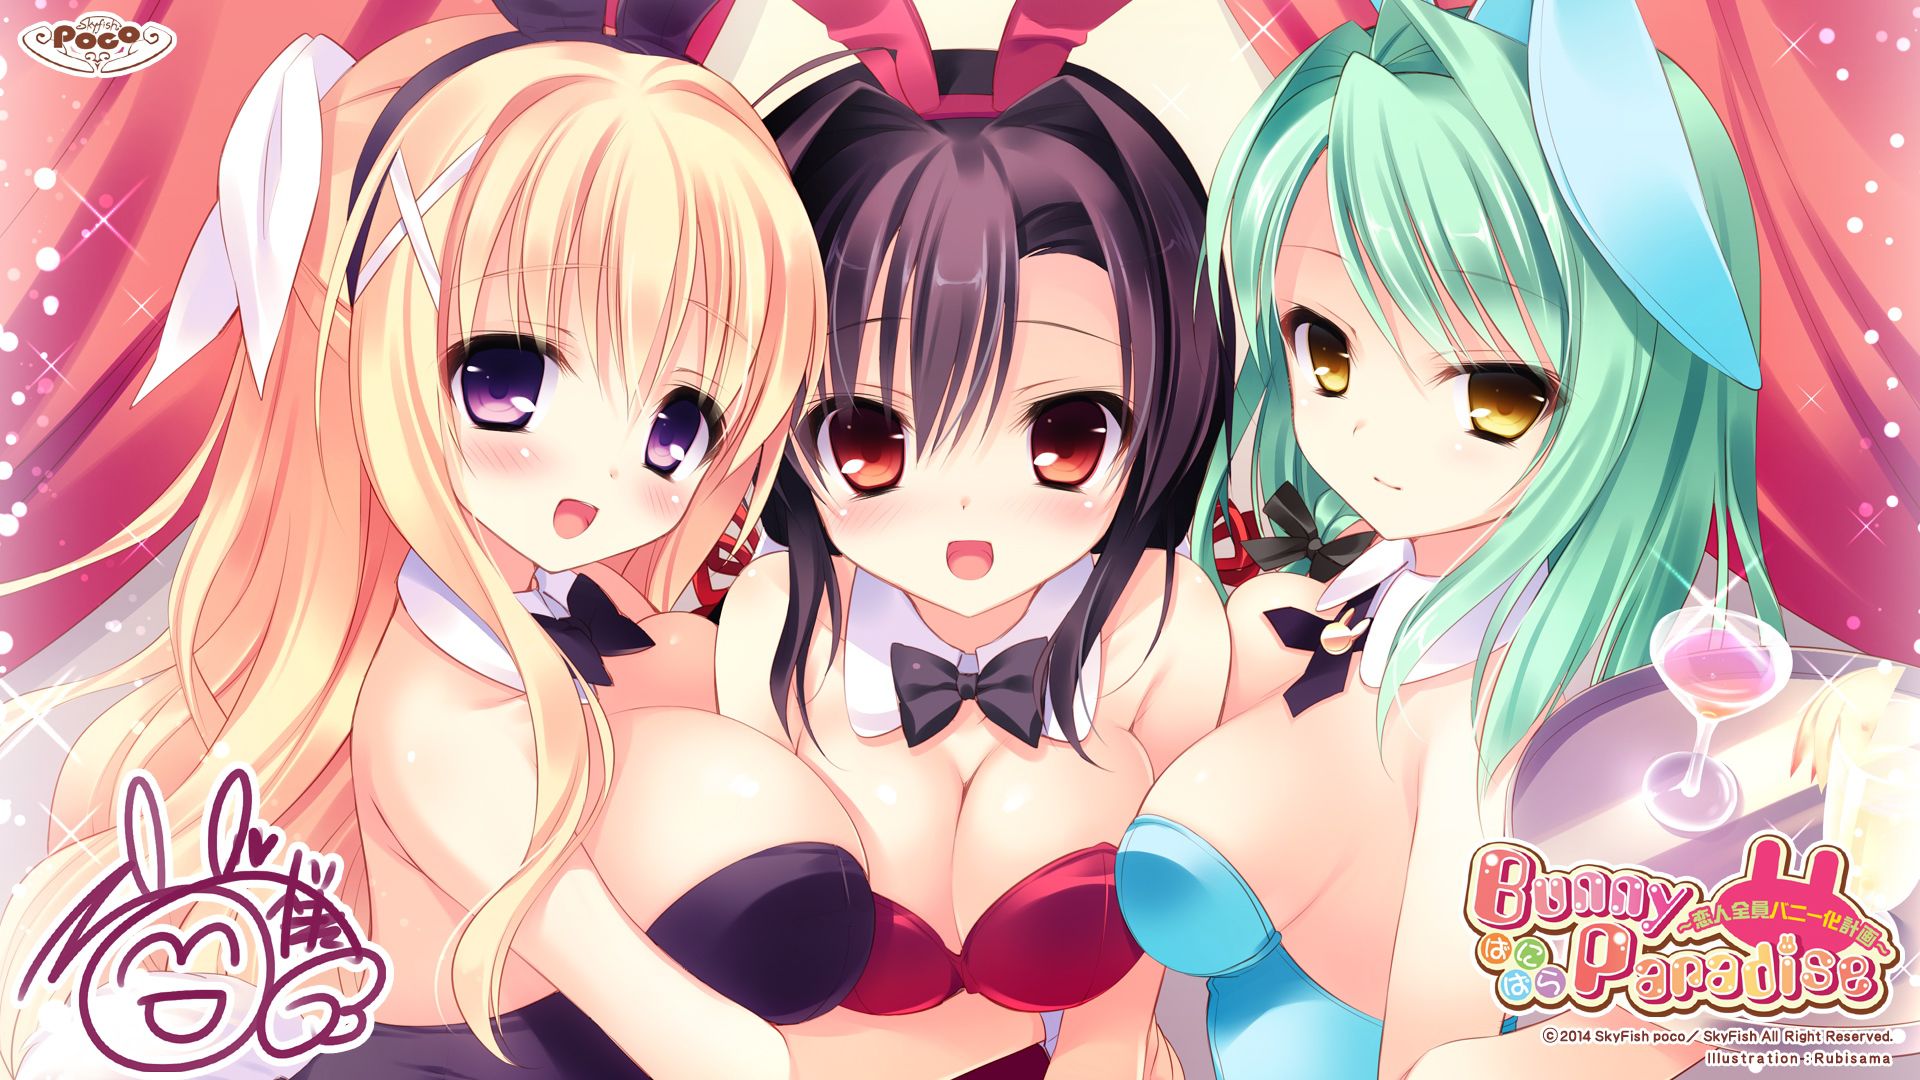 Bunny Paradise carried on from [under age 18 prohibited eroge HCG] erotic pictures part 1 3